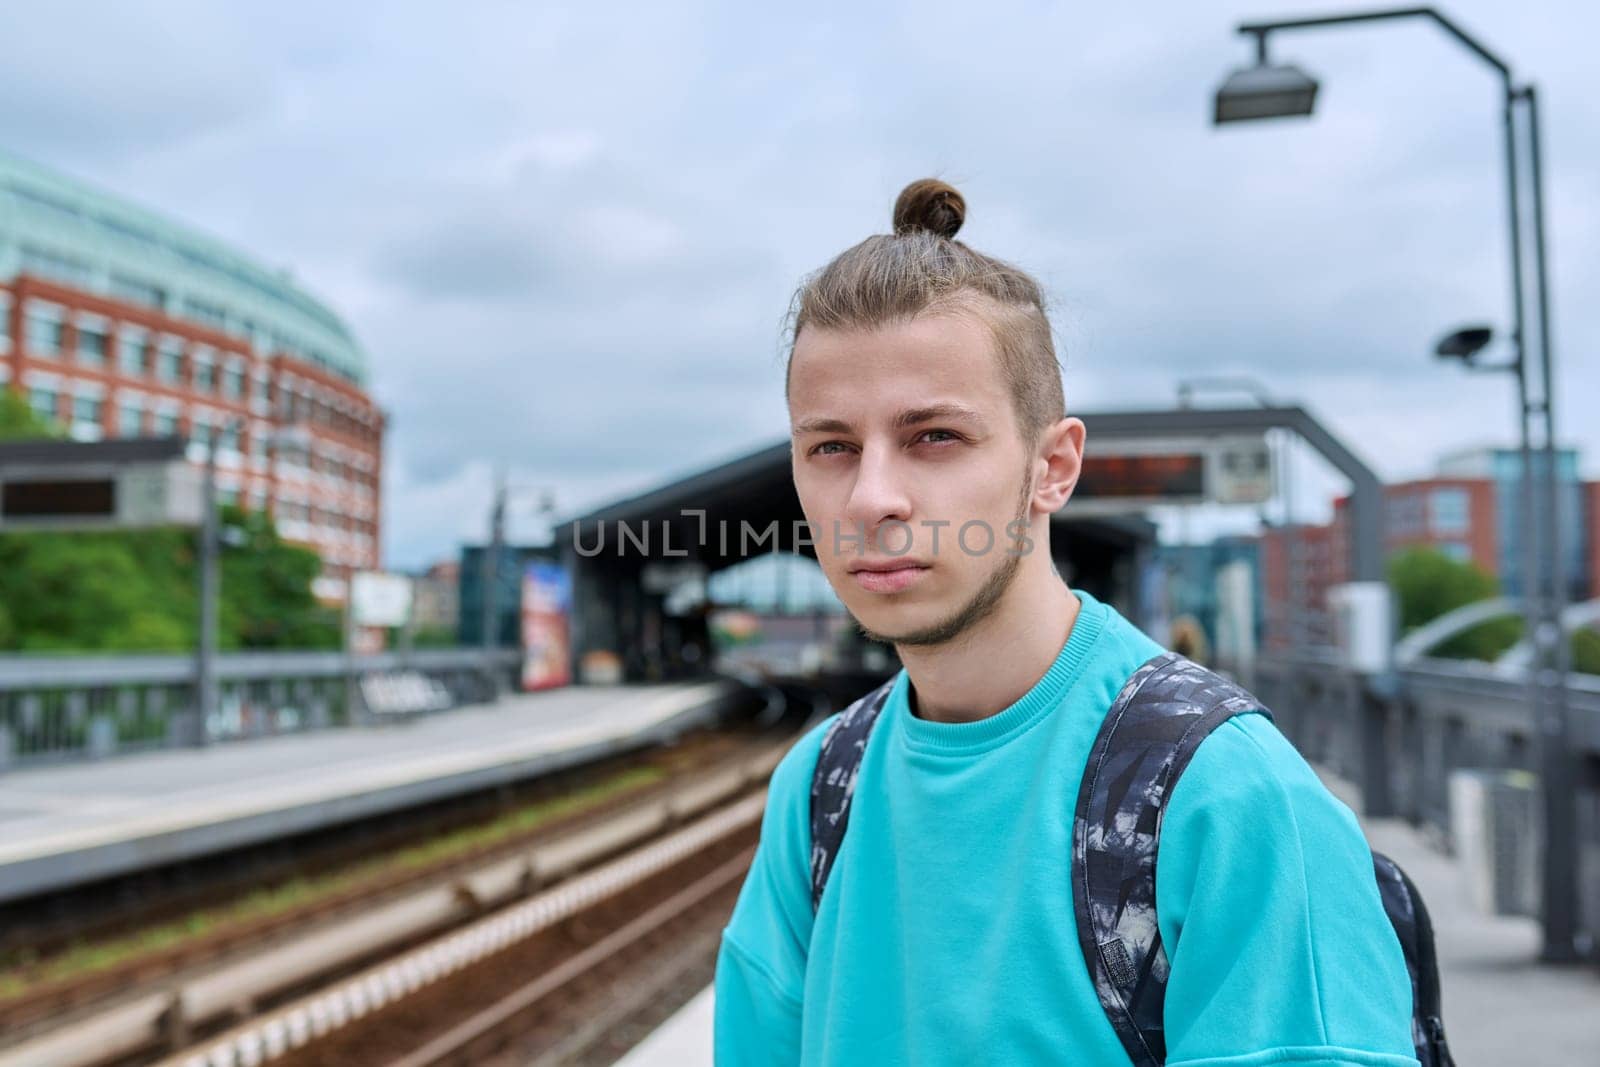 Young male waiting for electric train at city railway platform station. Guy serious student hipster 19, 20 years old with backpack. Urban transport, commuter train, passenger transportation, youth